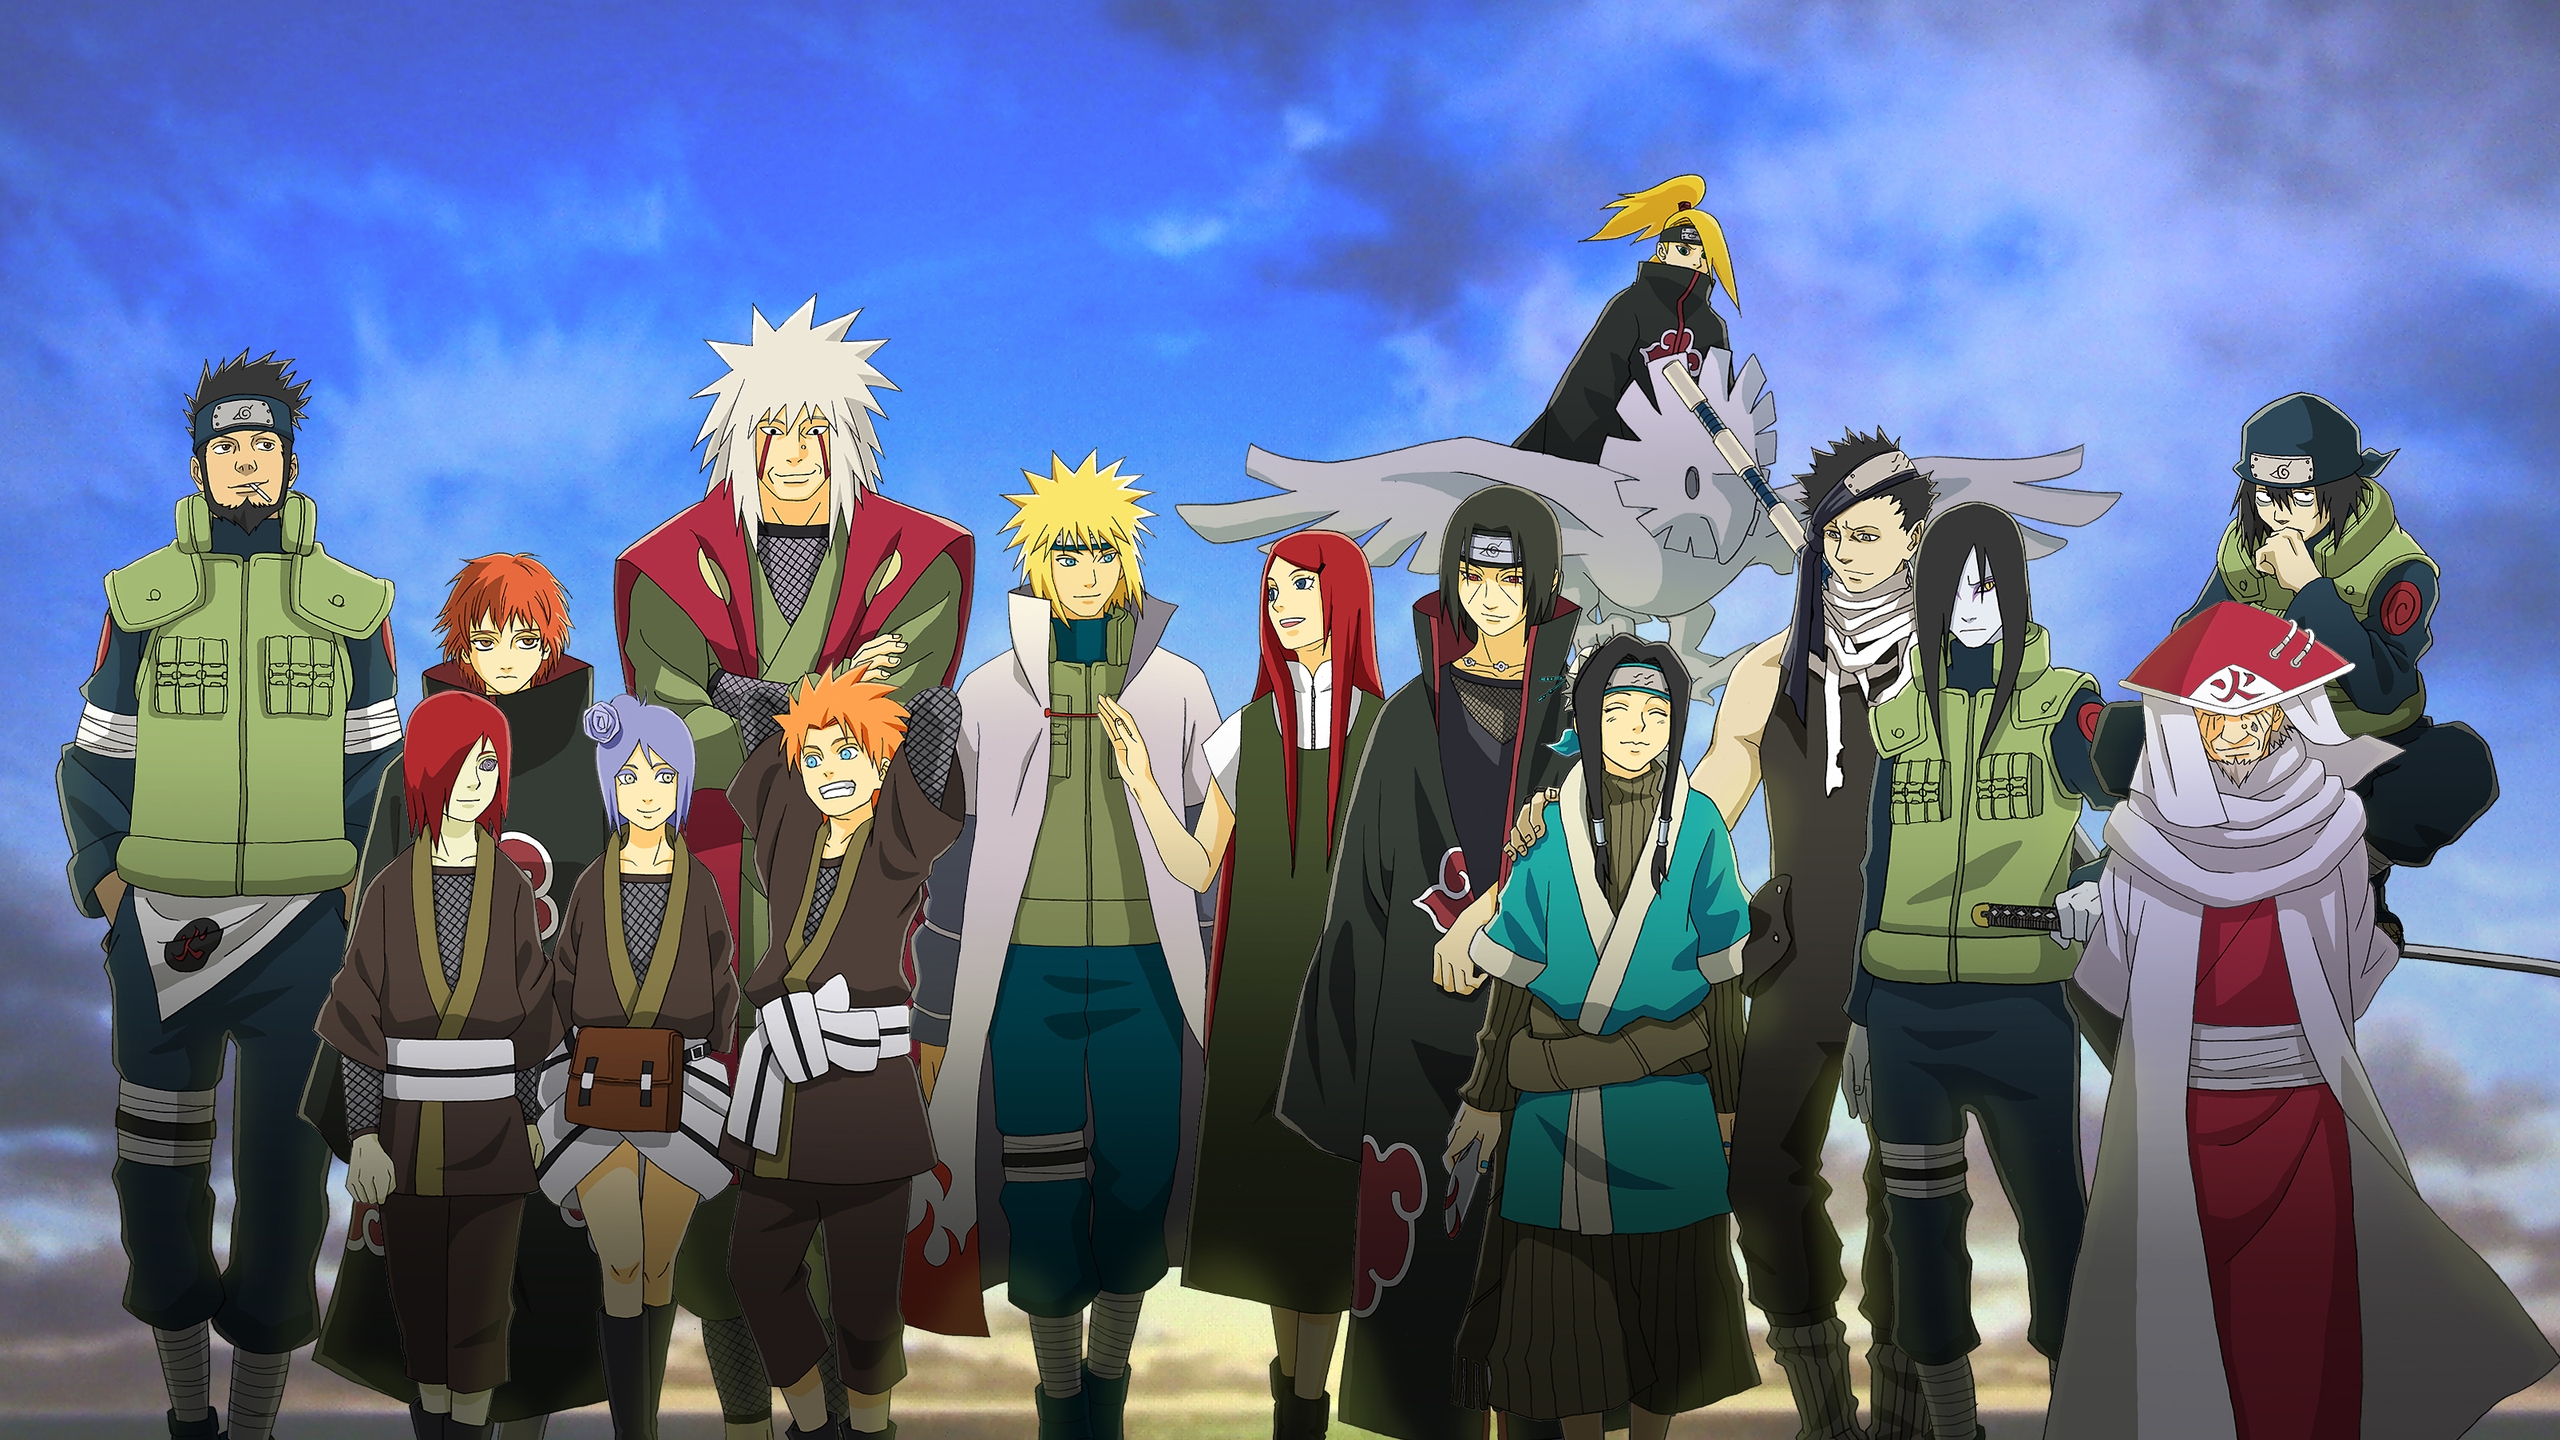 Naruto Friends for 2560x1440 HDTV resolution